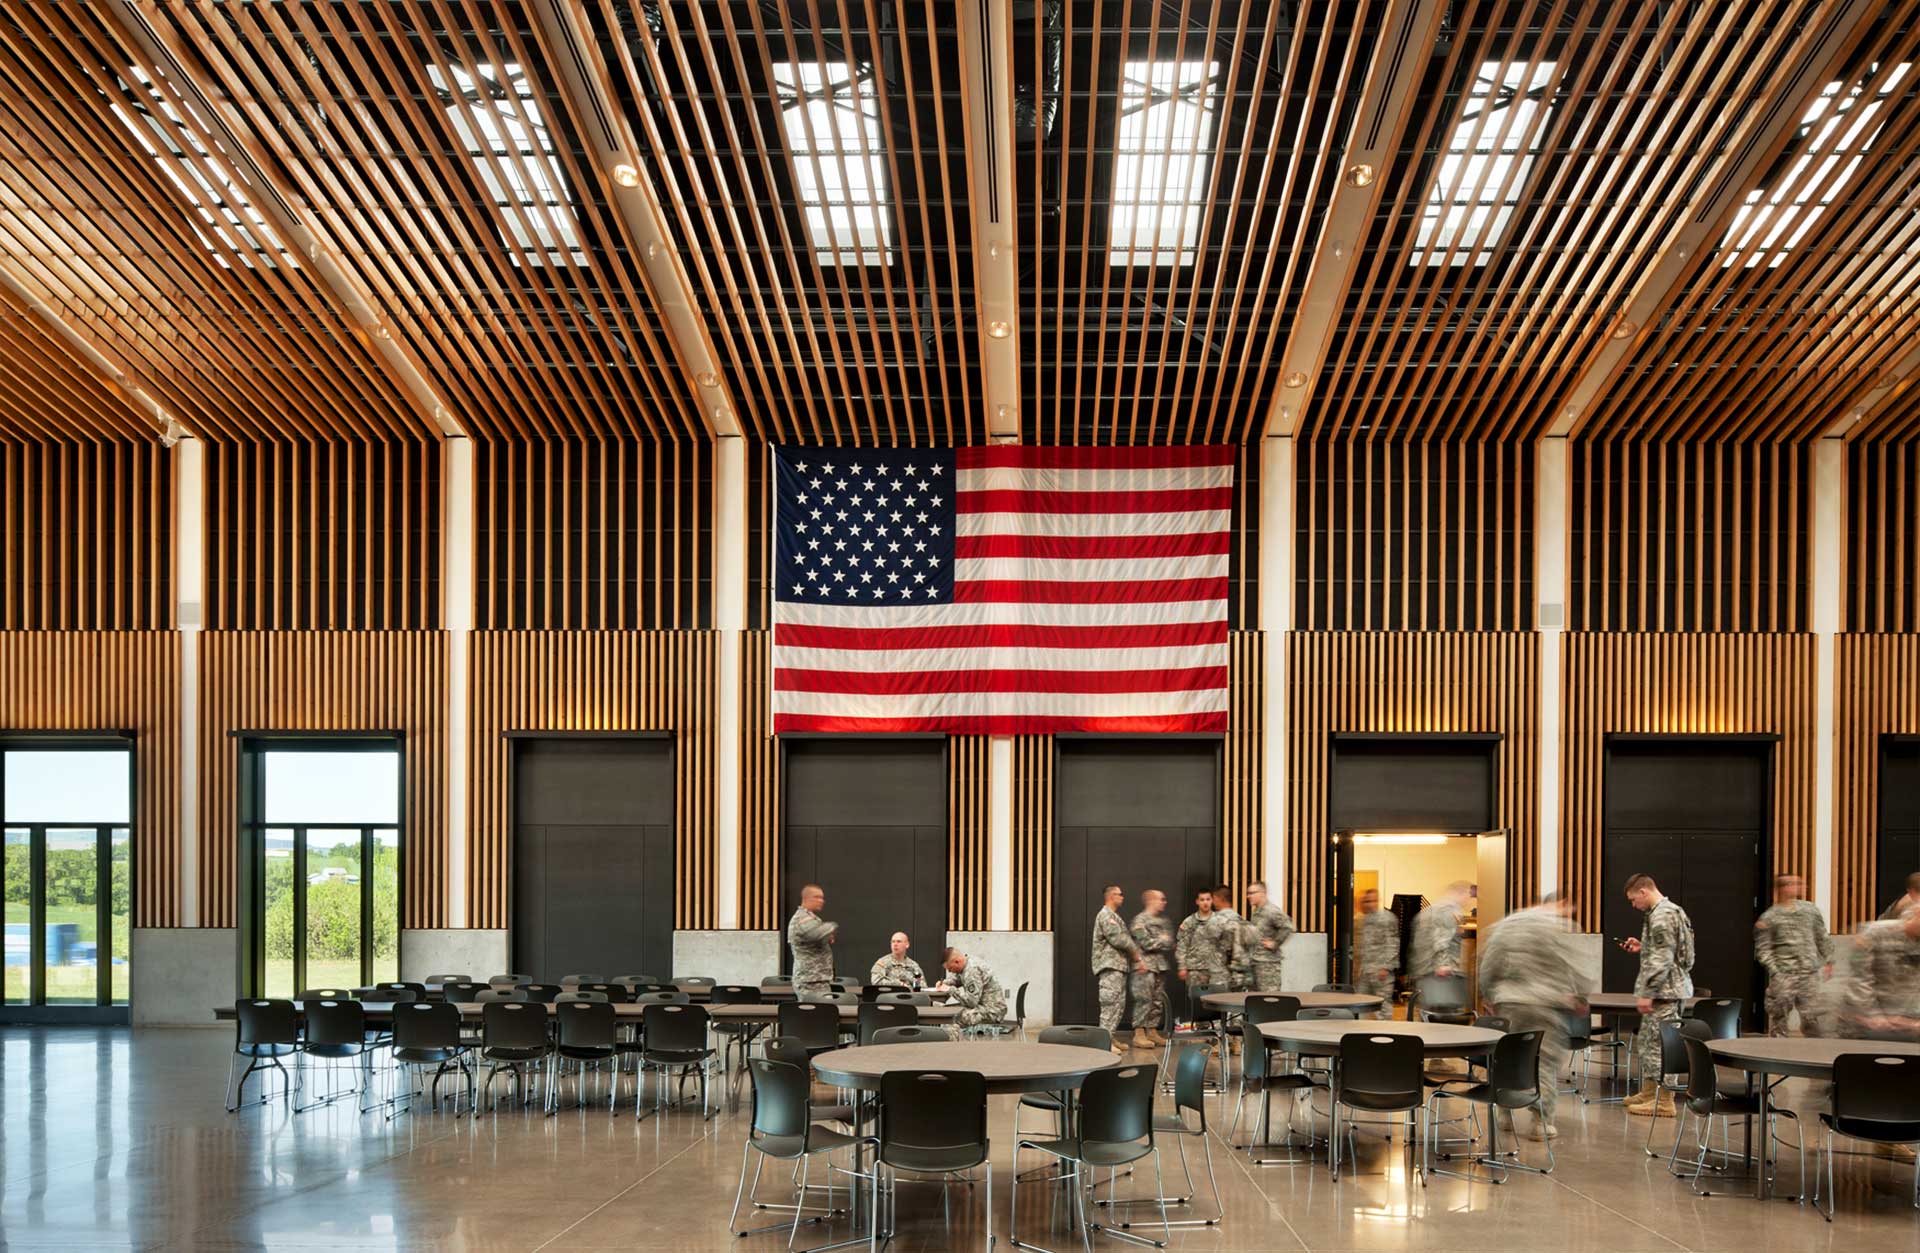 Colonel Neosmith Readiness Center interior with combat engineers in uniform and American flag